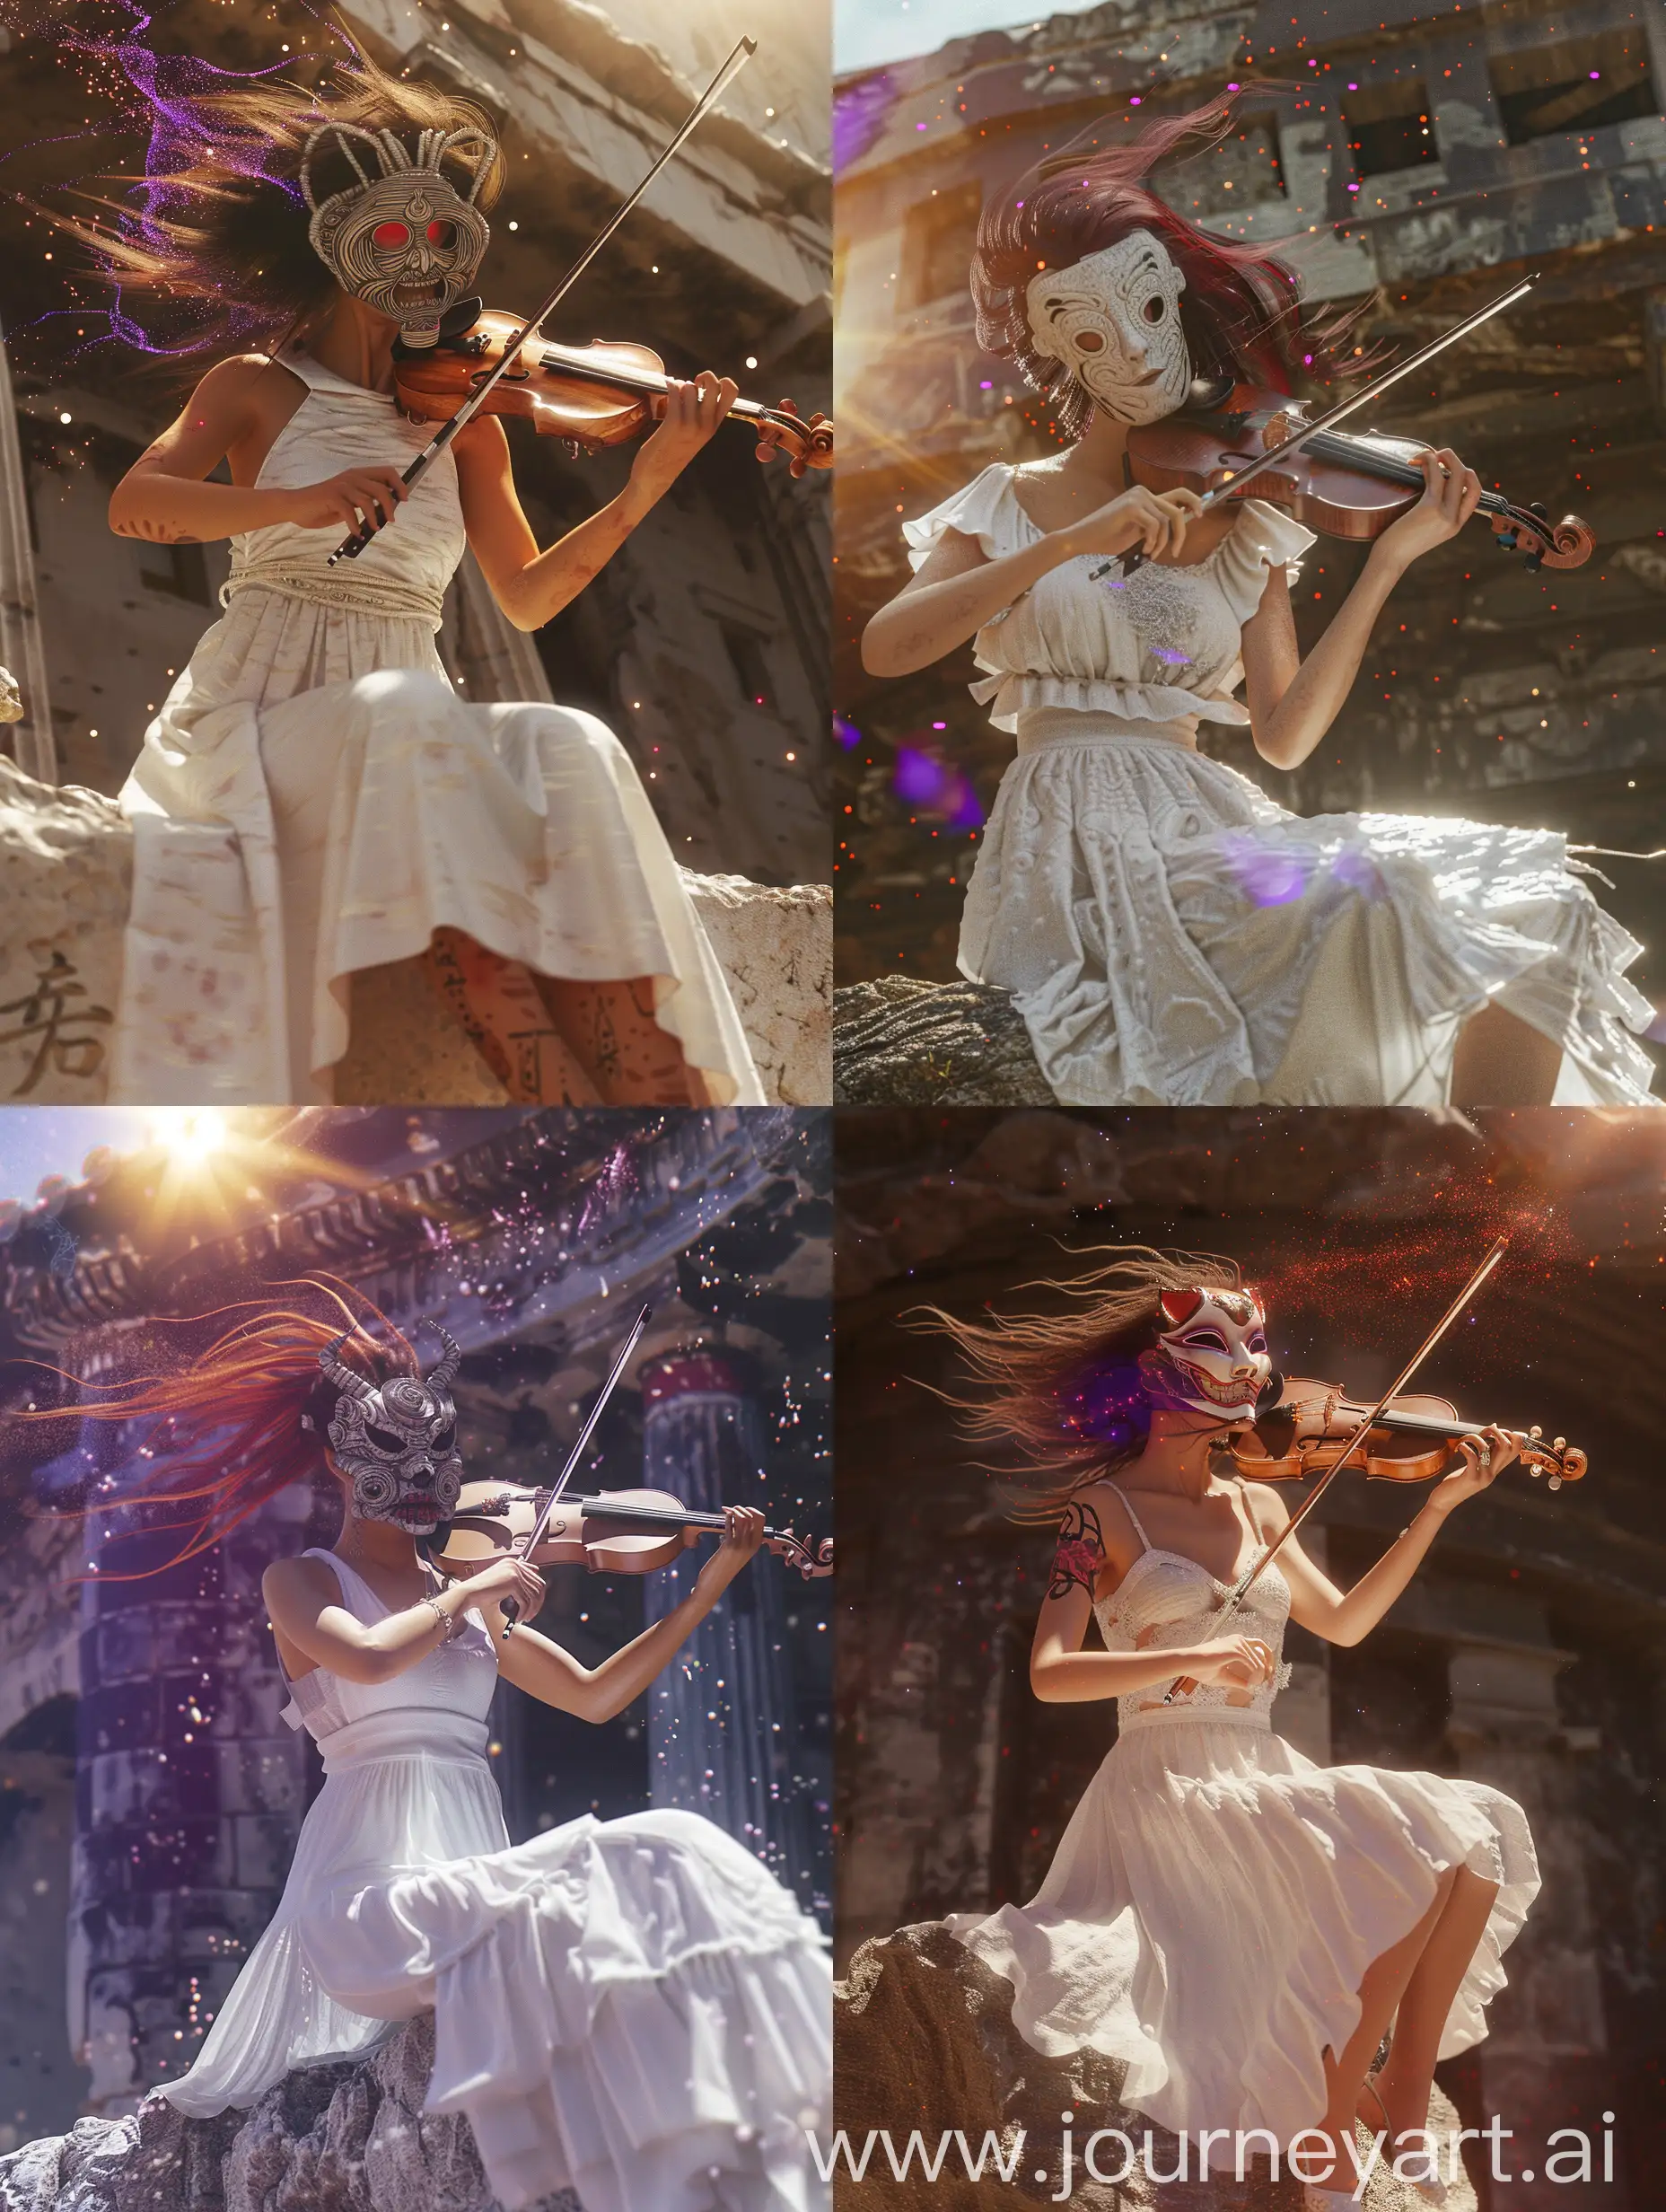 a woman wearing Japanese twisted namahage mask playing violin ((( Yokai))) , in a white space dress sits on a rock above the abyss, the sun, the wind blowing hair and dress, madness, purple-red mixed tones, cinematic, realism, Using (((imagination))) to craft a photorealistic representation of an unusual fantasy dream, Abandoned ancient temple in Tokyo, Amazing, shocking, Mysterious, Contrasty, ivory colors, Memphis, magic sparkles lighting, The UHD camera captures every detail of this moment, highlighting the colors and textures. Render her in a photorealistic style, cinematic, capturing the fine details of her features and surroundings. Pay close attention to realistic skin tones, textures, and lighting conditions. Ensure the image is in high resolution, such as 8K, to showcase the intricate details and allo